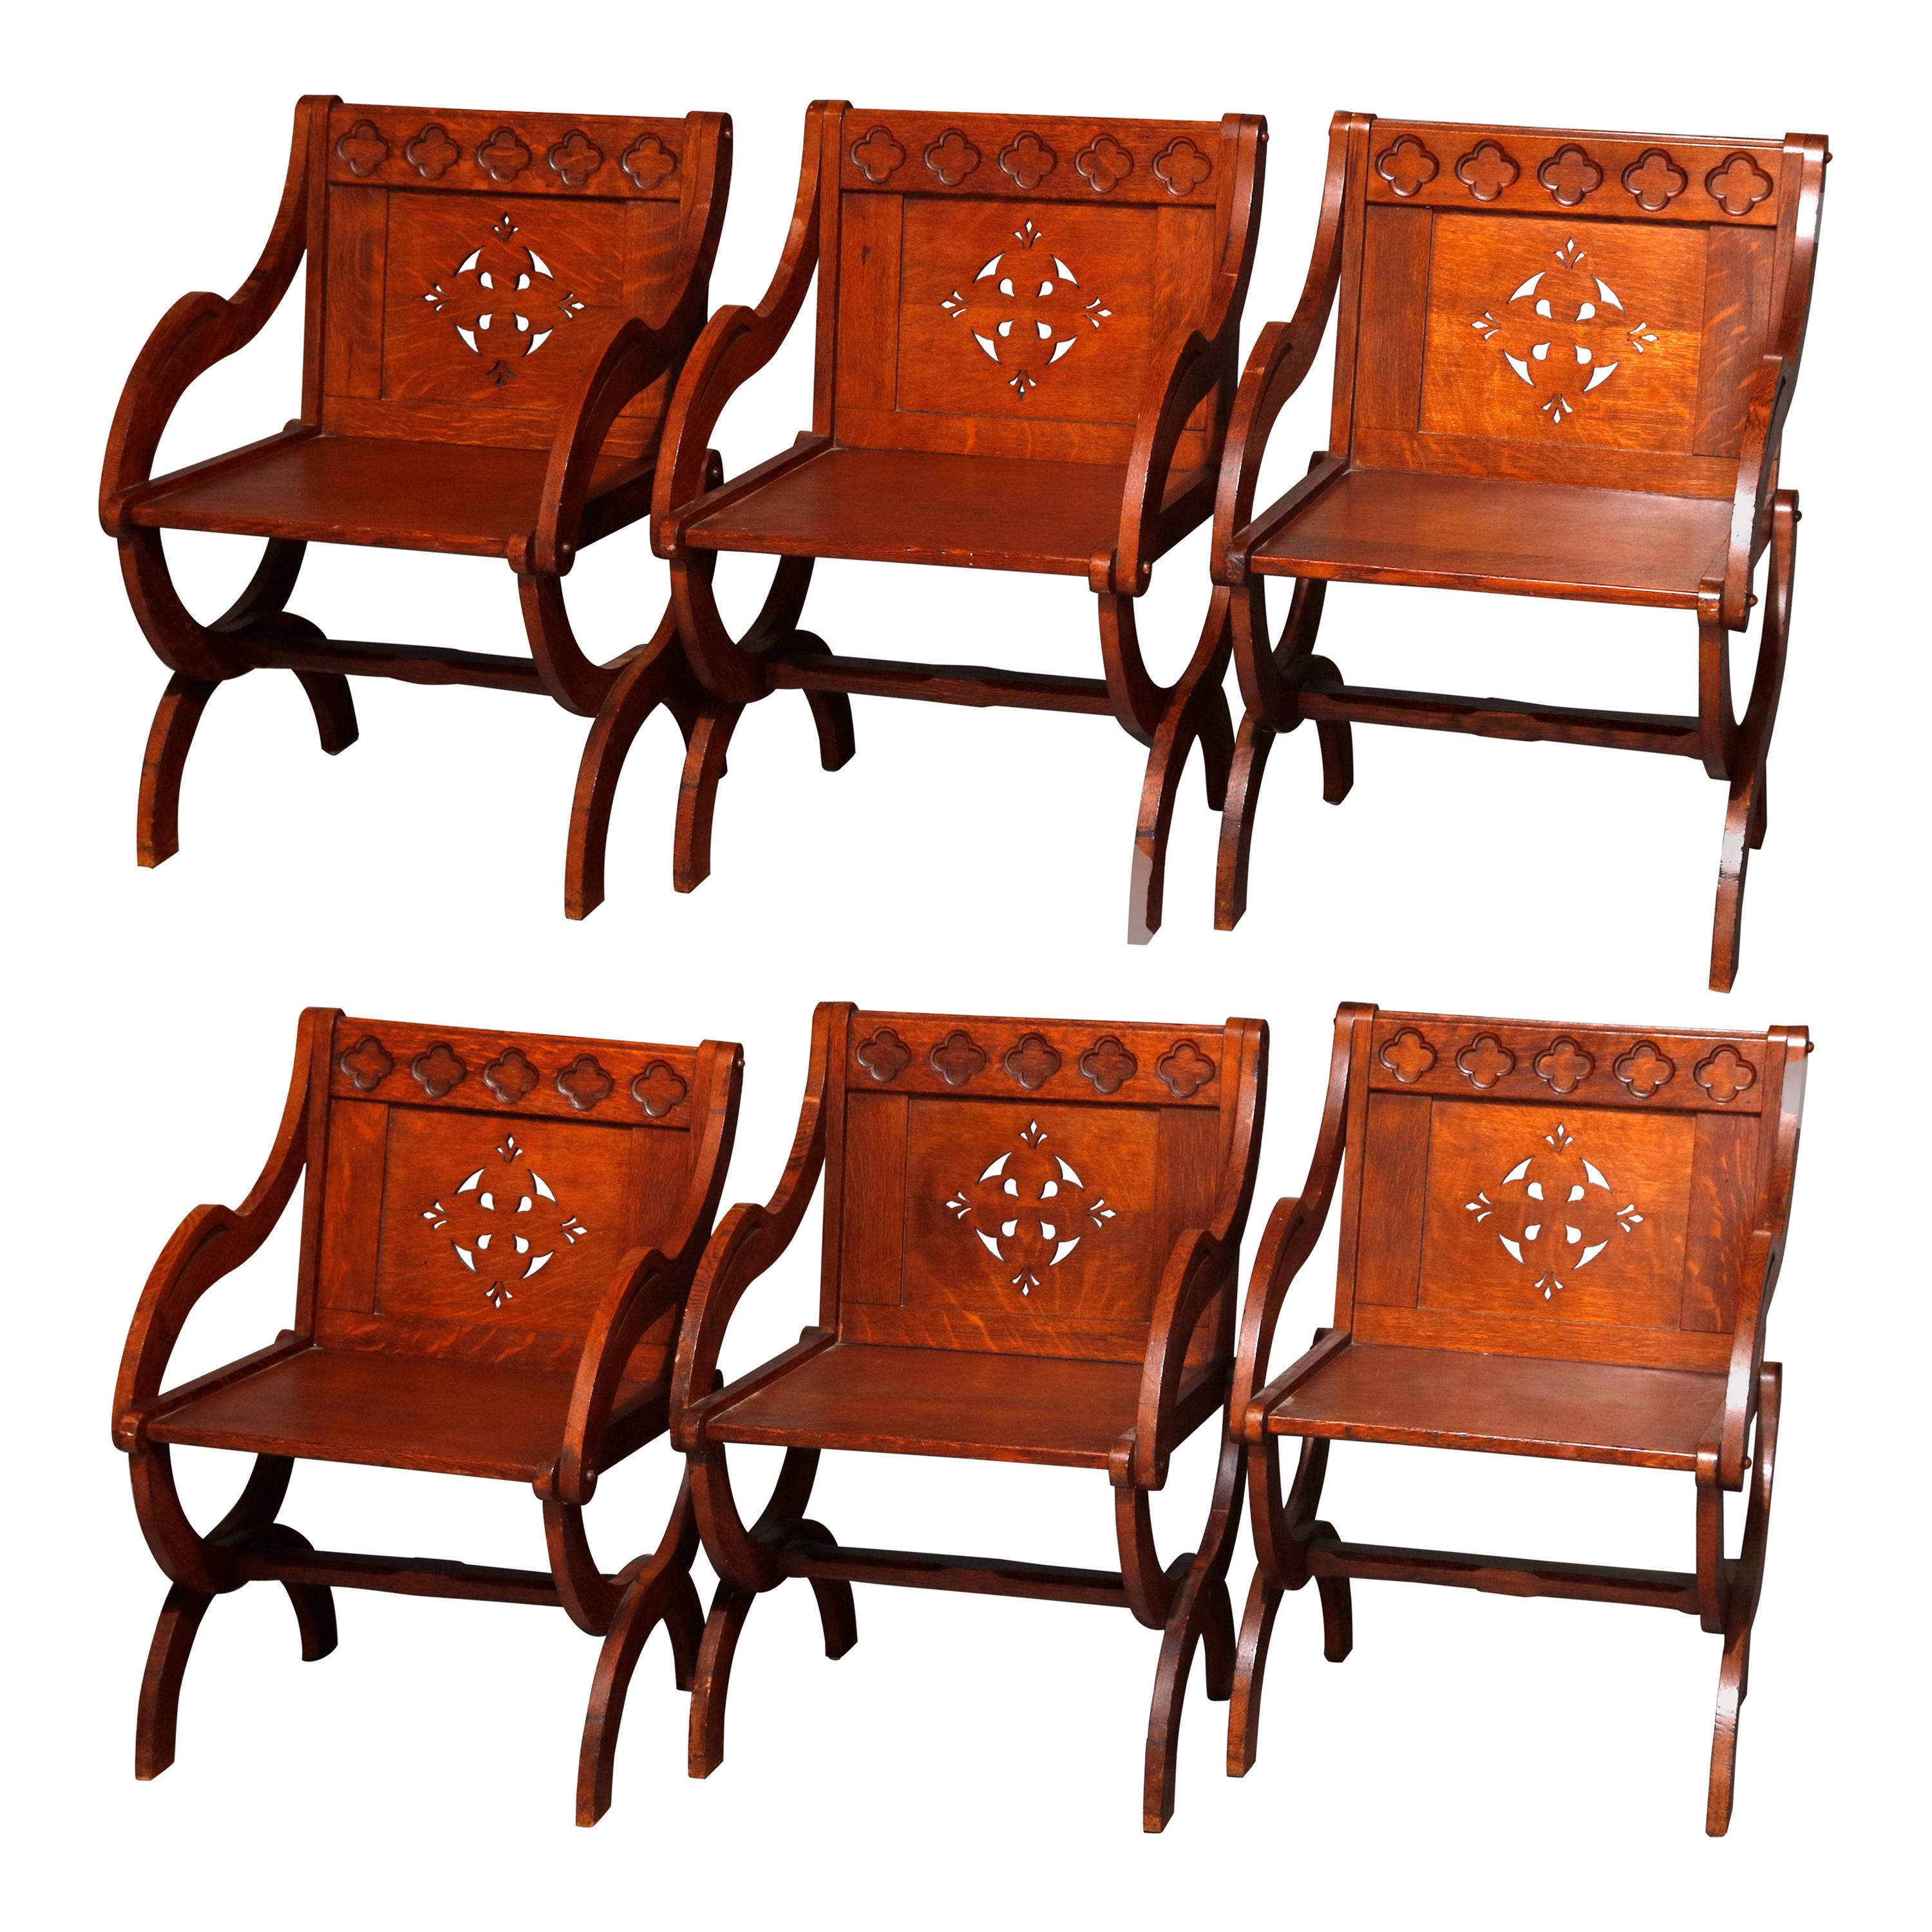 6 Antique Gothic Carved & Cut-Out Oak Curule Form Armchairs, circa 1900